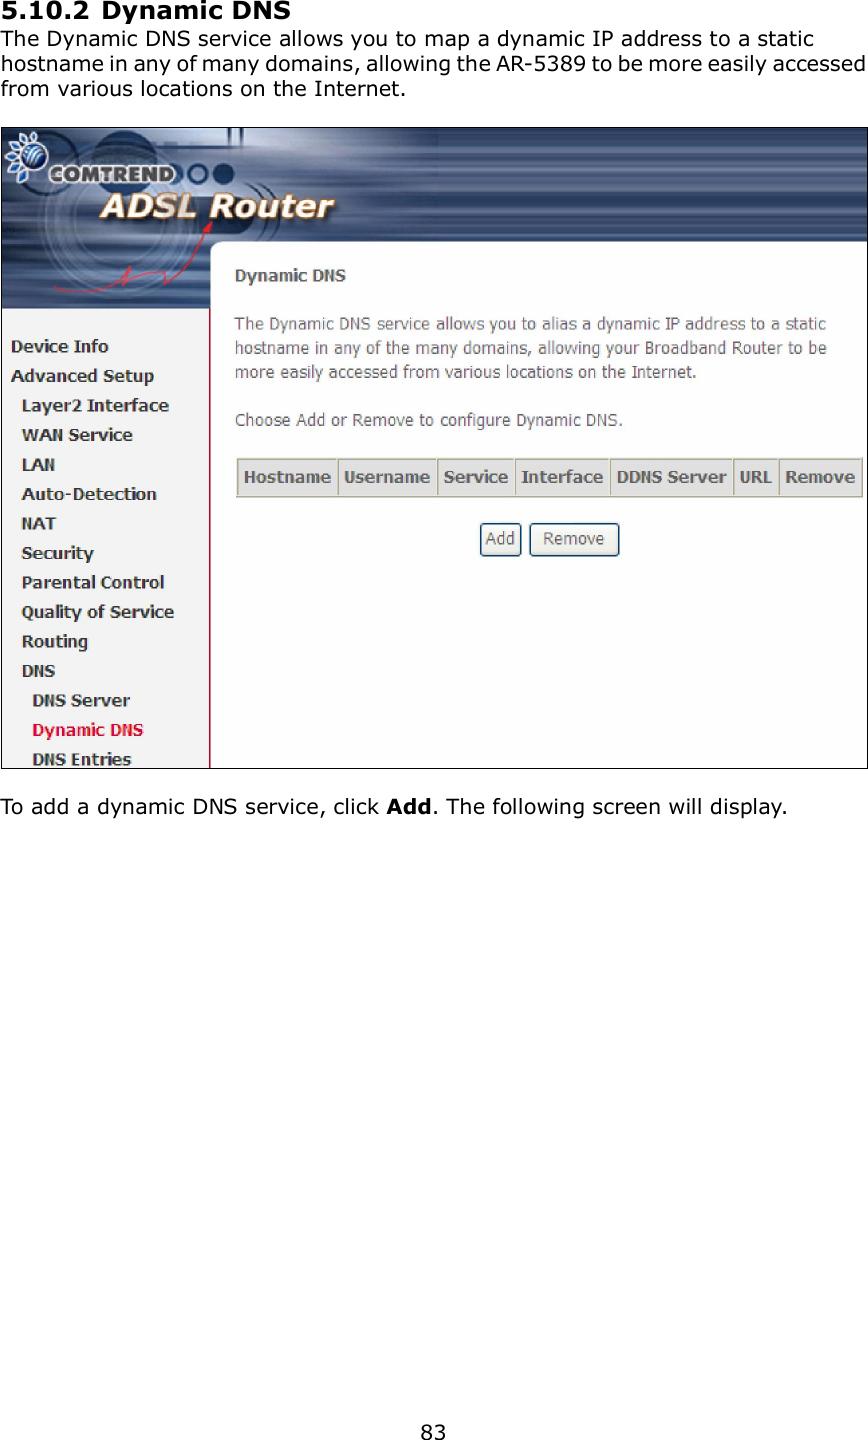  83   5.10.2 Dynamic DNS The Dynamic DNS service allows you to map a dynamic IP address to a static hostname in any of many domains, allowing the AR-5389 to be more easily accessed from various locations on the Internet.    To add a dynamic DNS service, click Add. The following screen will display.  